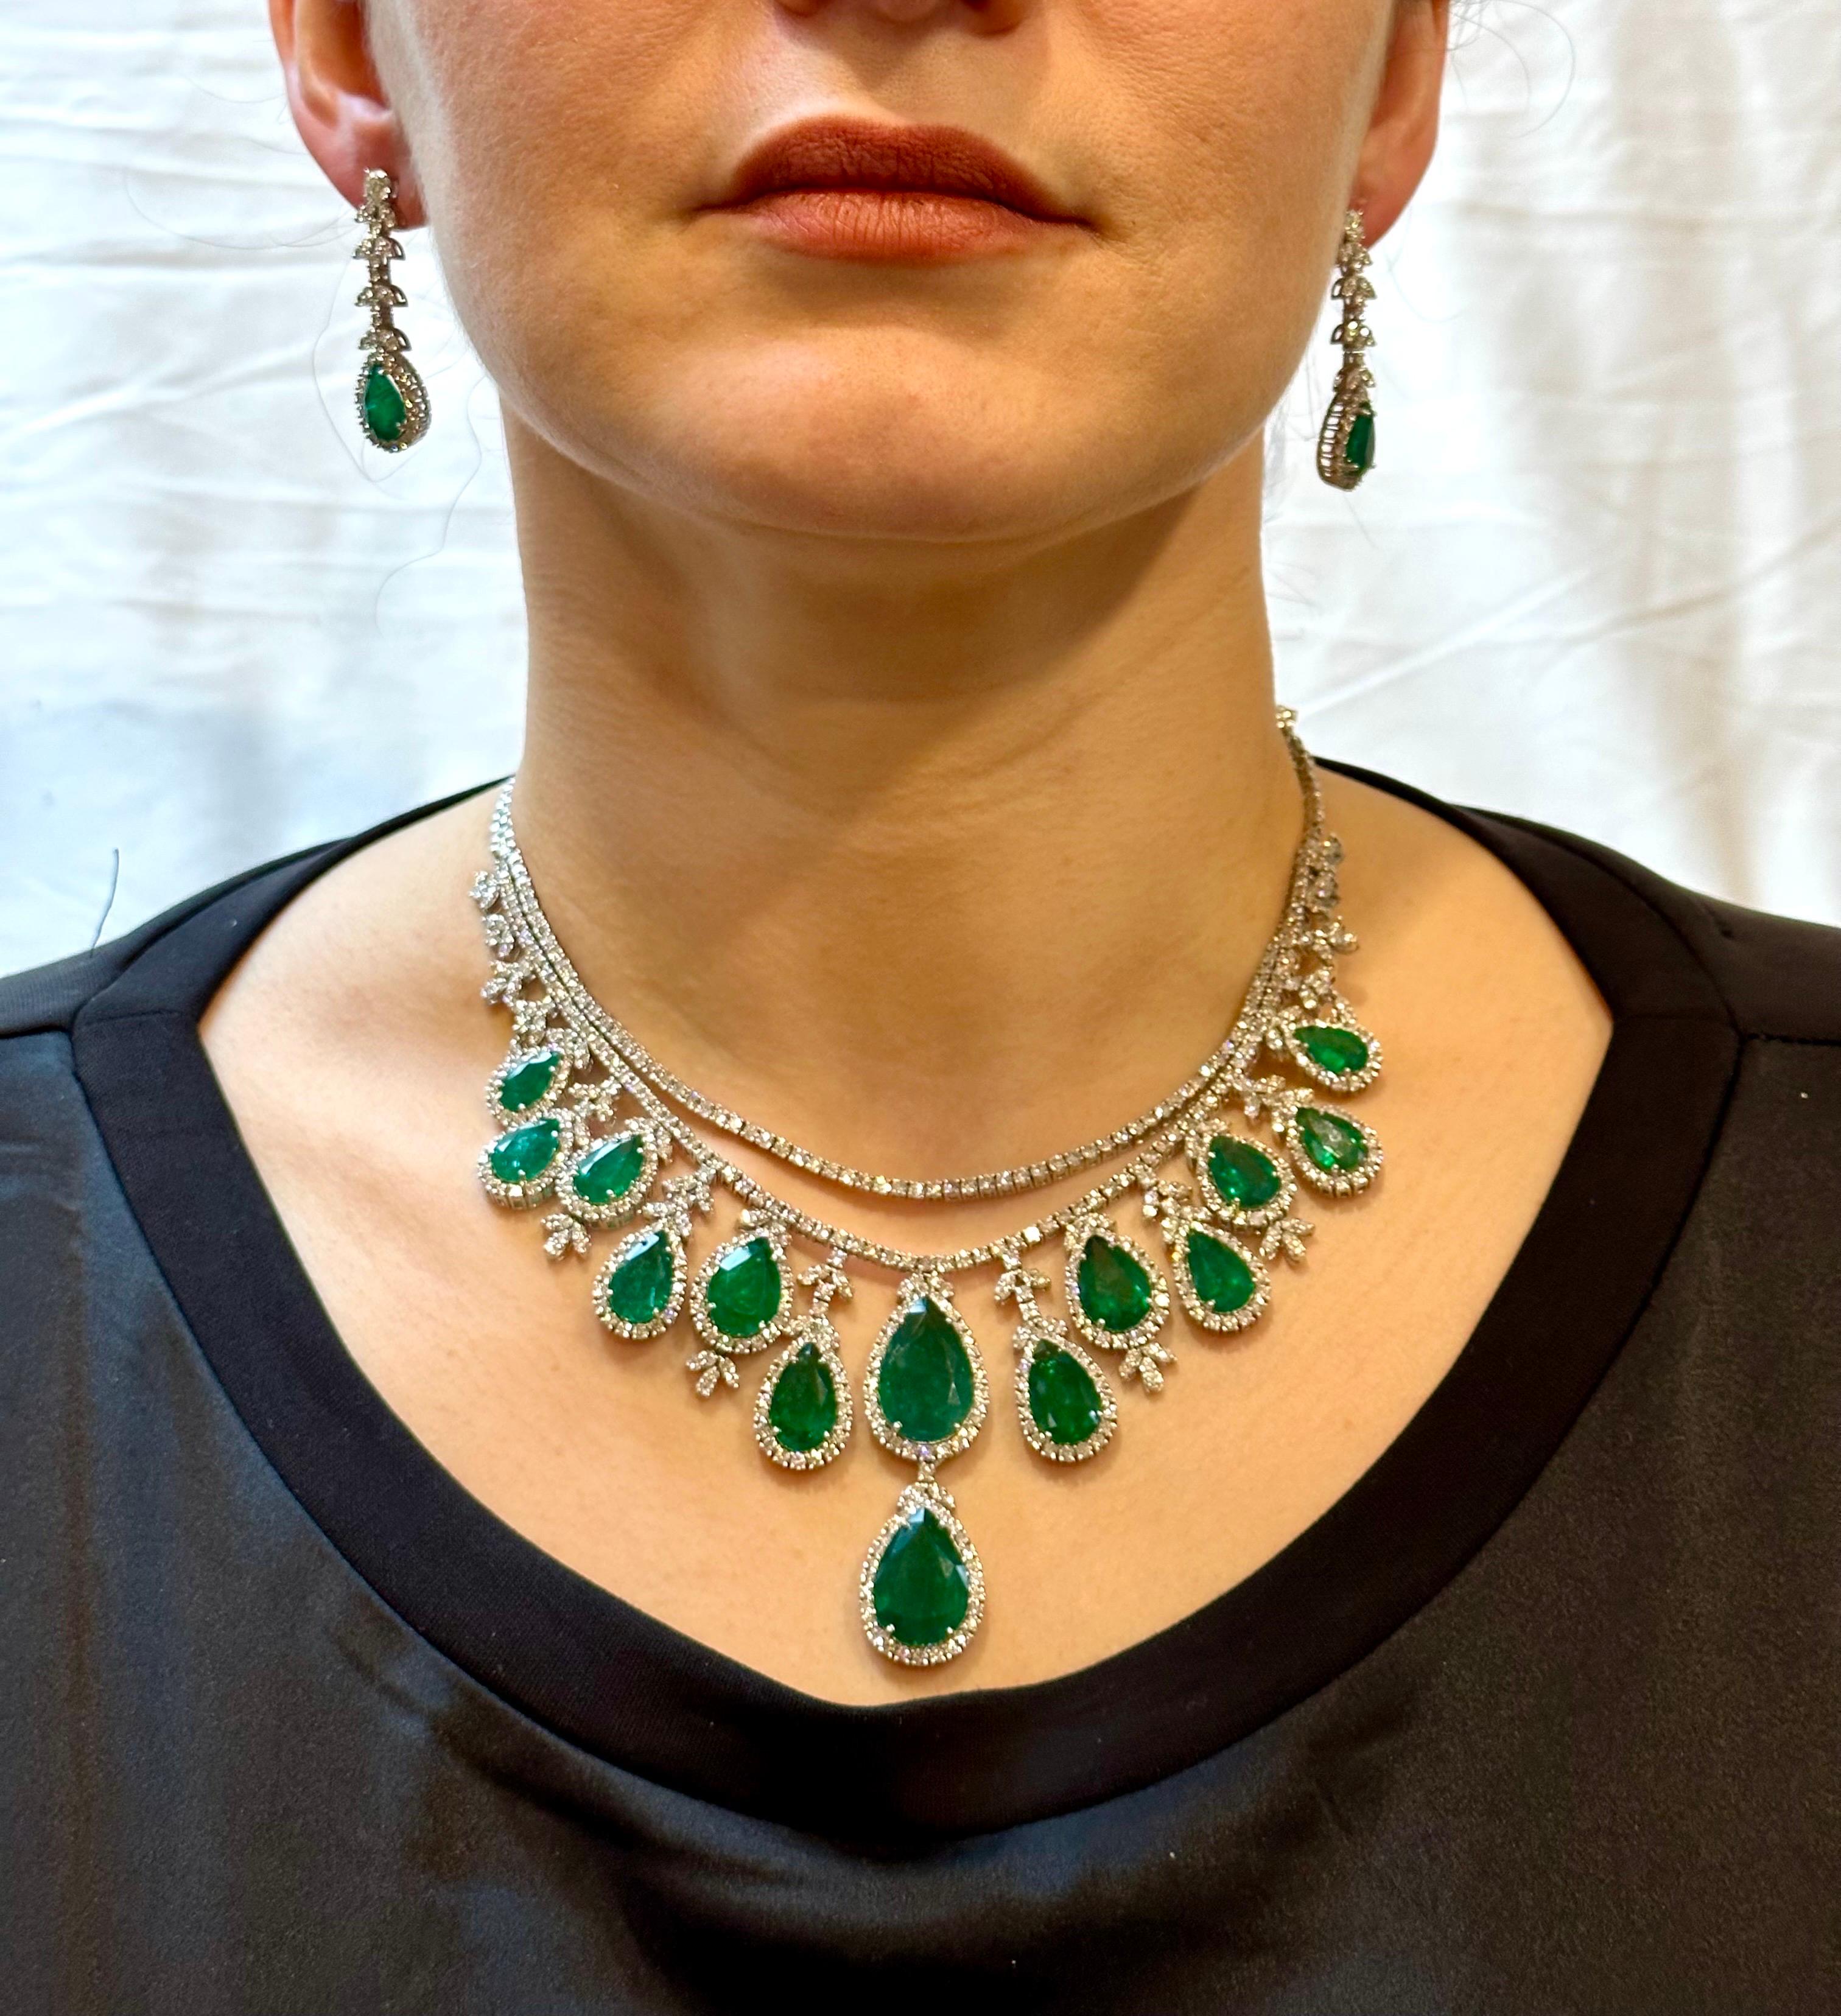 75 Ct Zambian Emerald and 30 Ct Diamond Necklace and Earring Bridal Suite For Sale 14